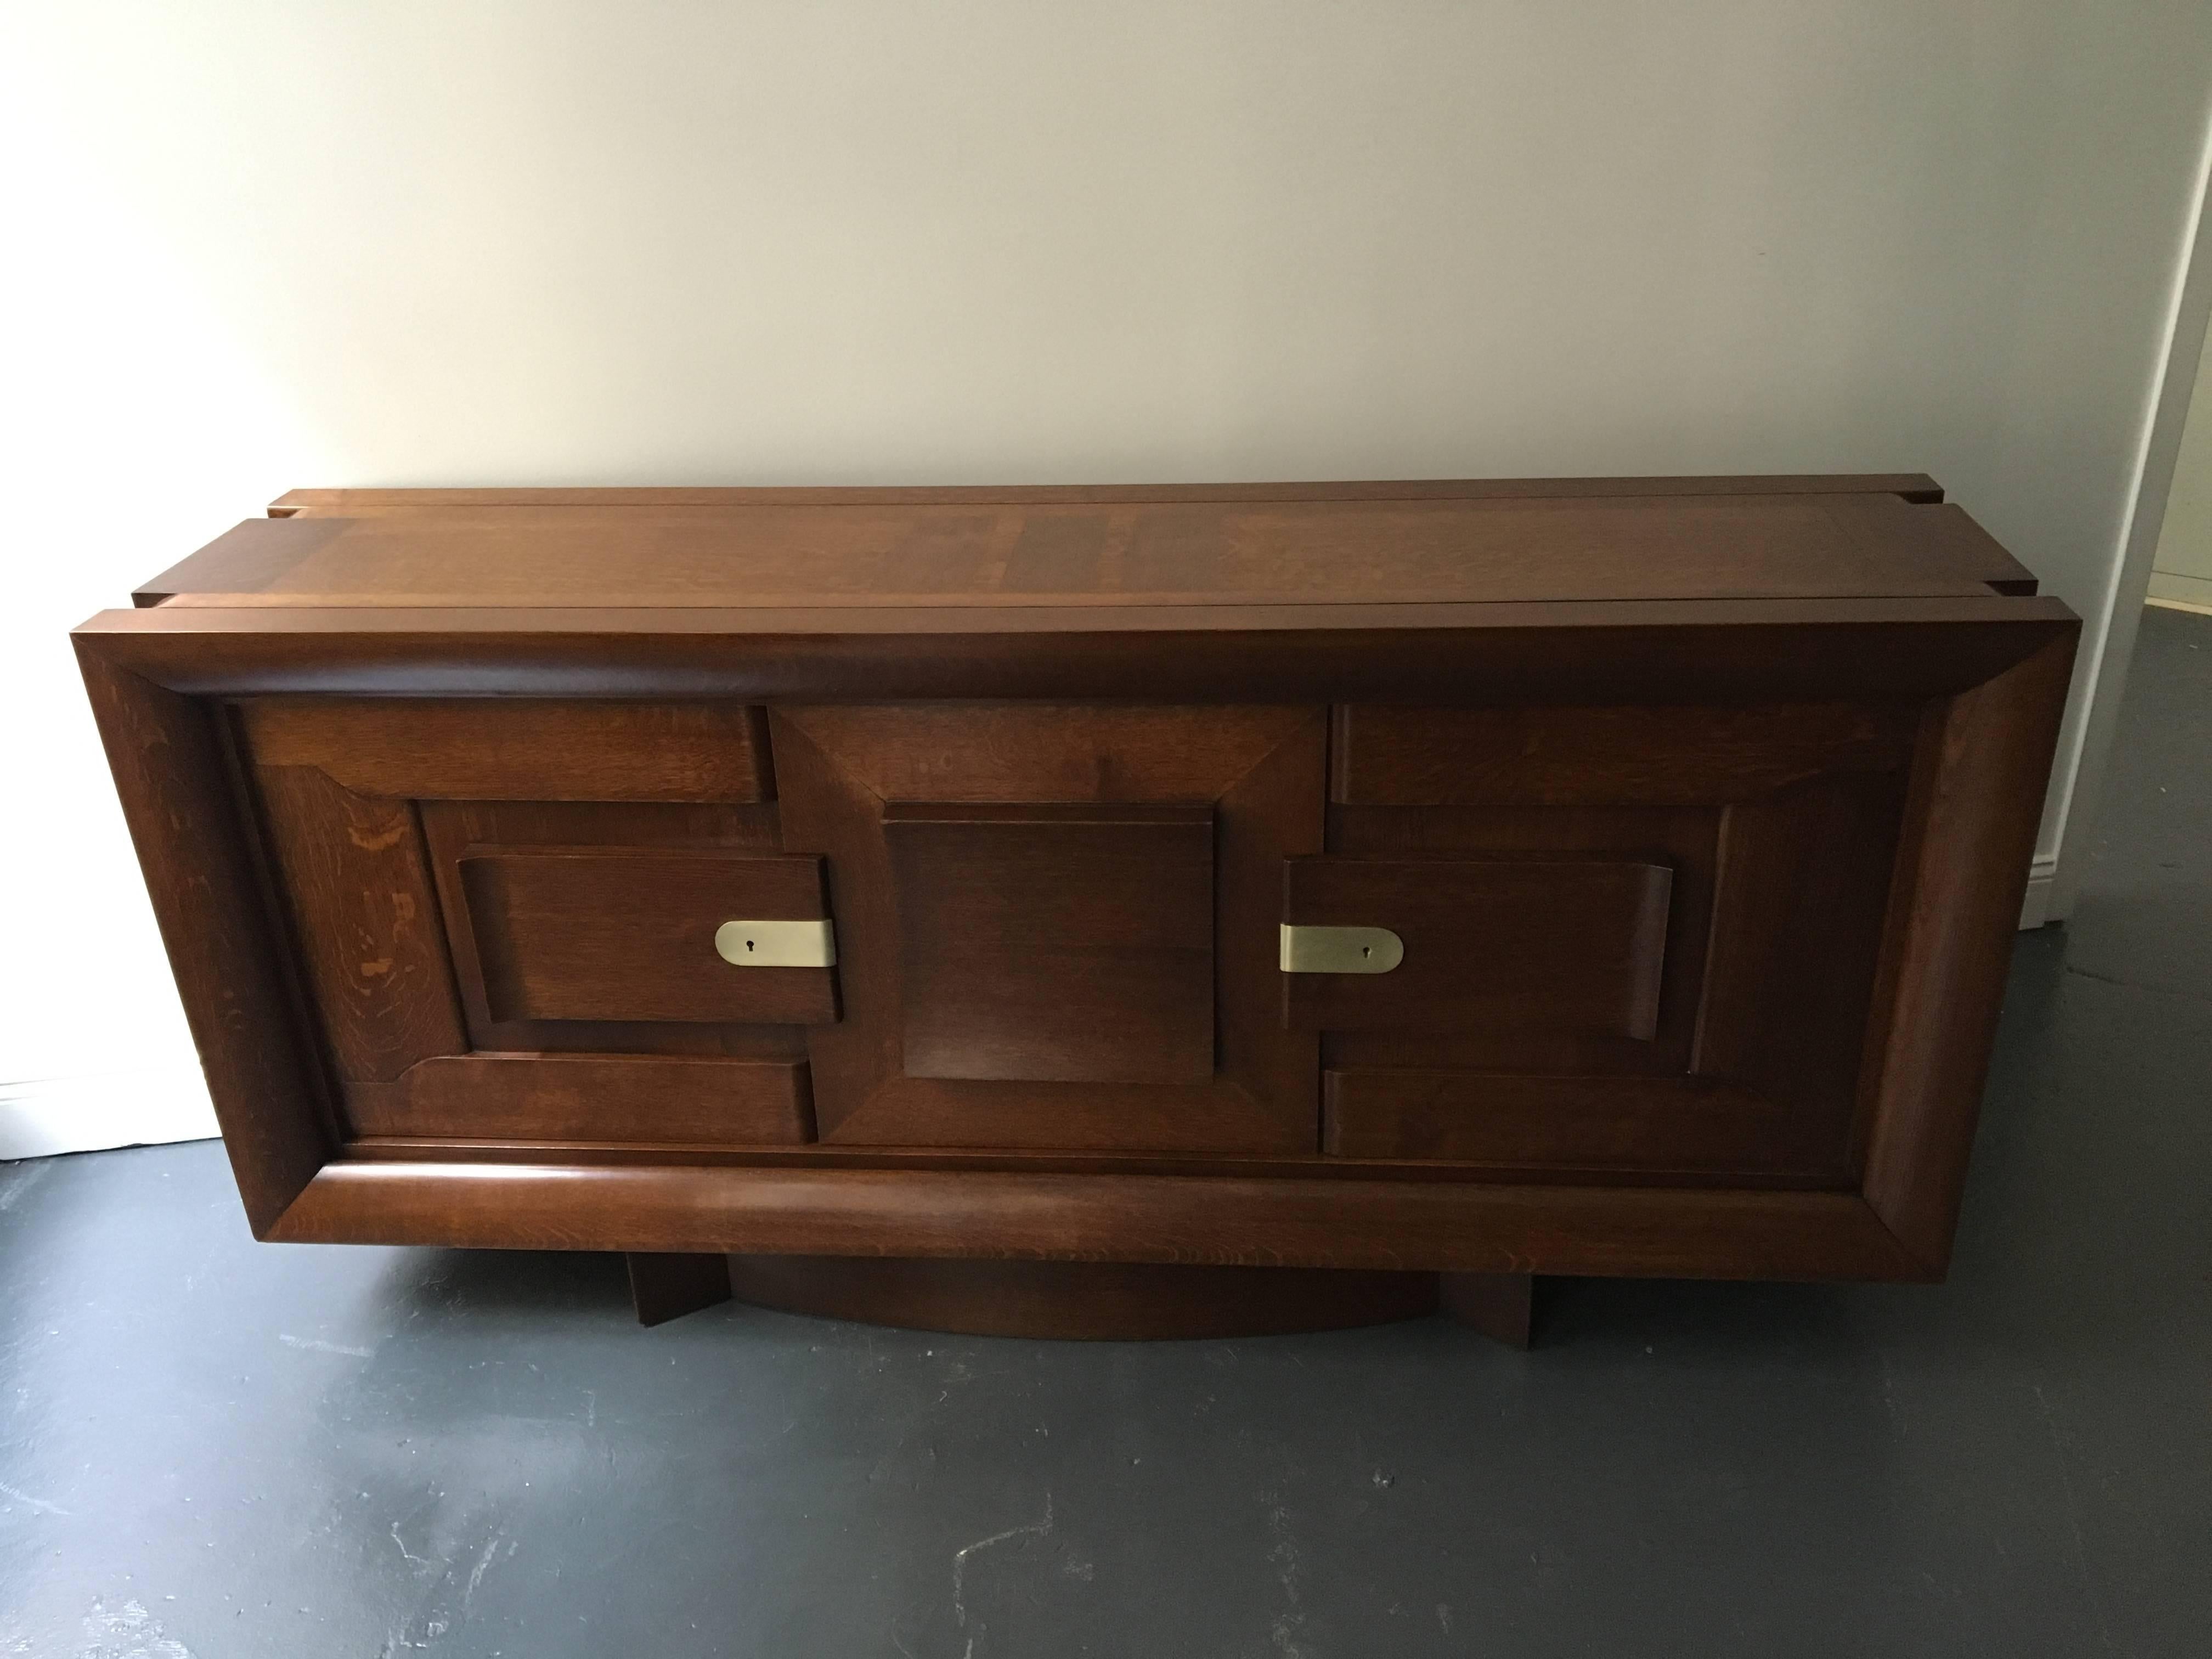 A rare sideboard by Charles Dudouyt with two doors that open to an interior with a center shelf and two small drawers. The center door does not open, but rolls left or right. The sideboard is made of solid oak and veneered oak. This sideboard was